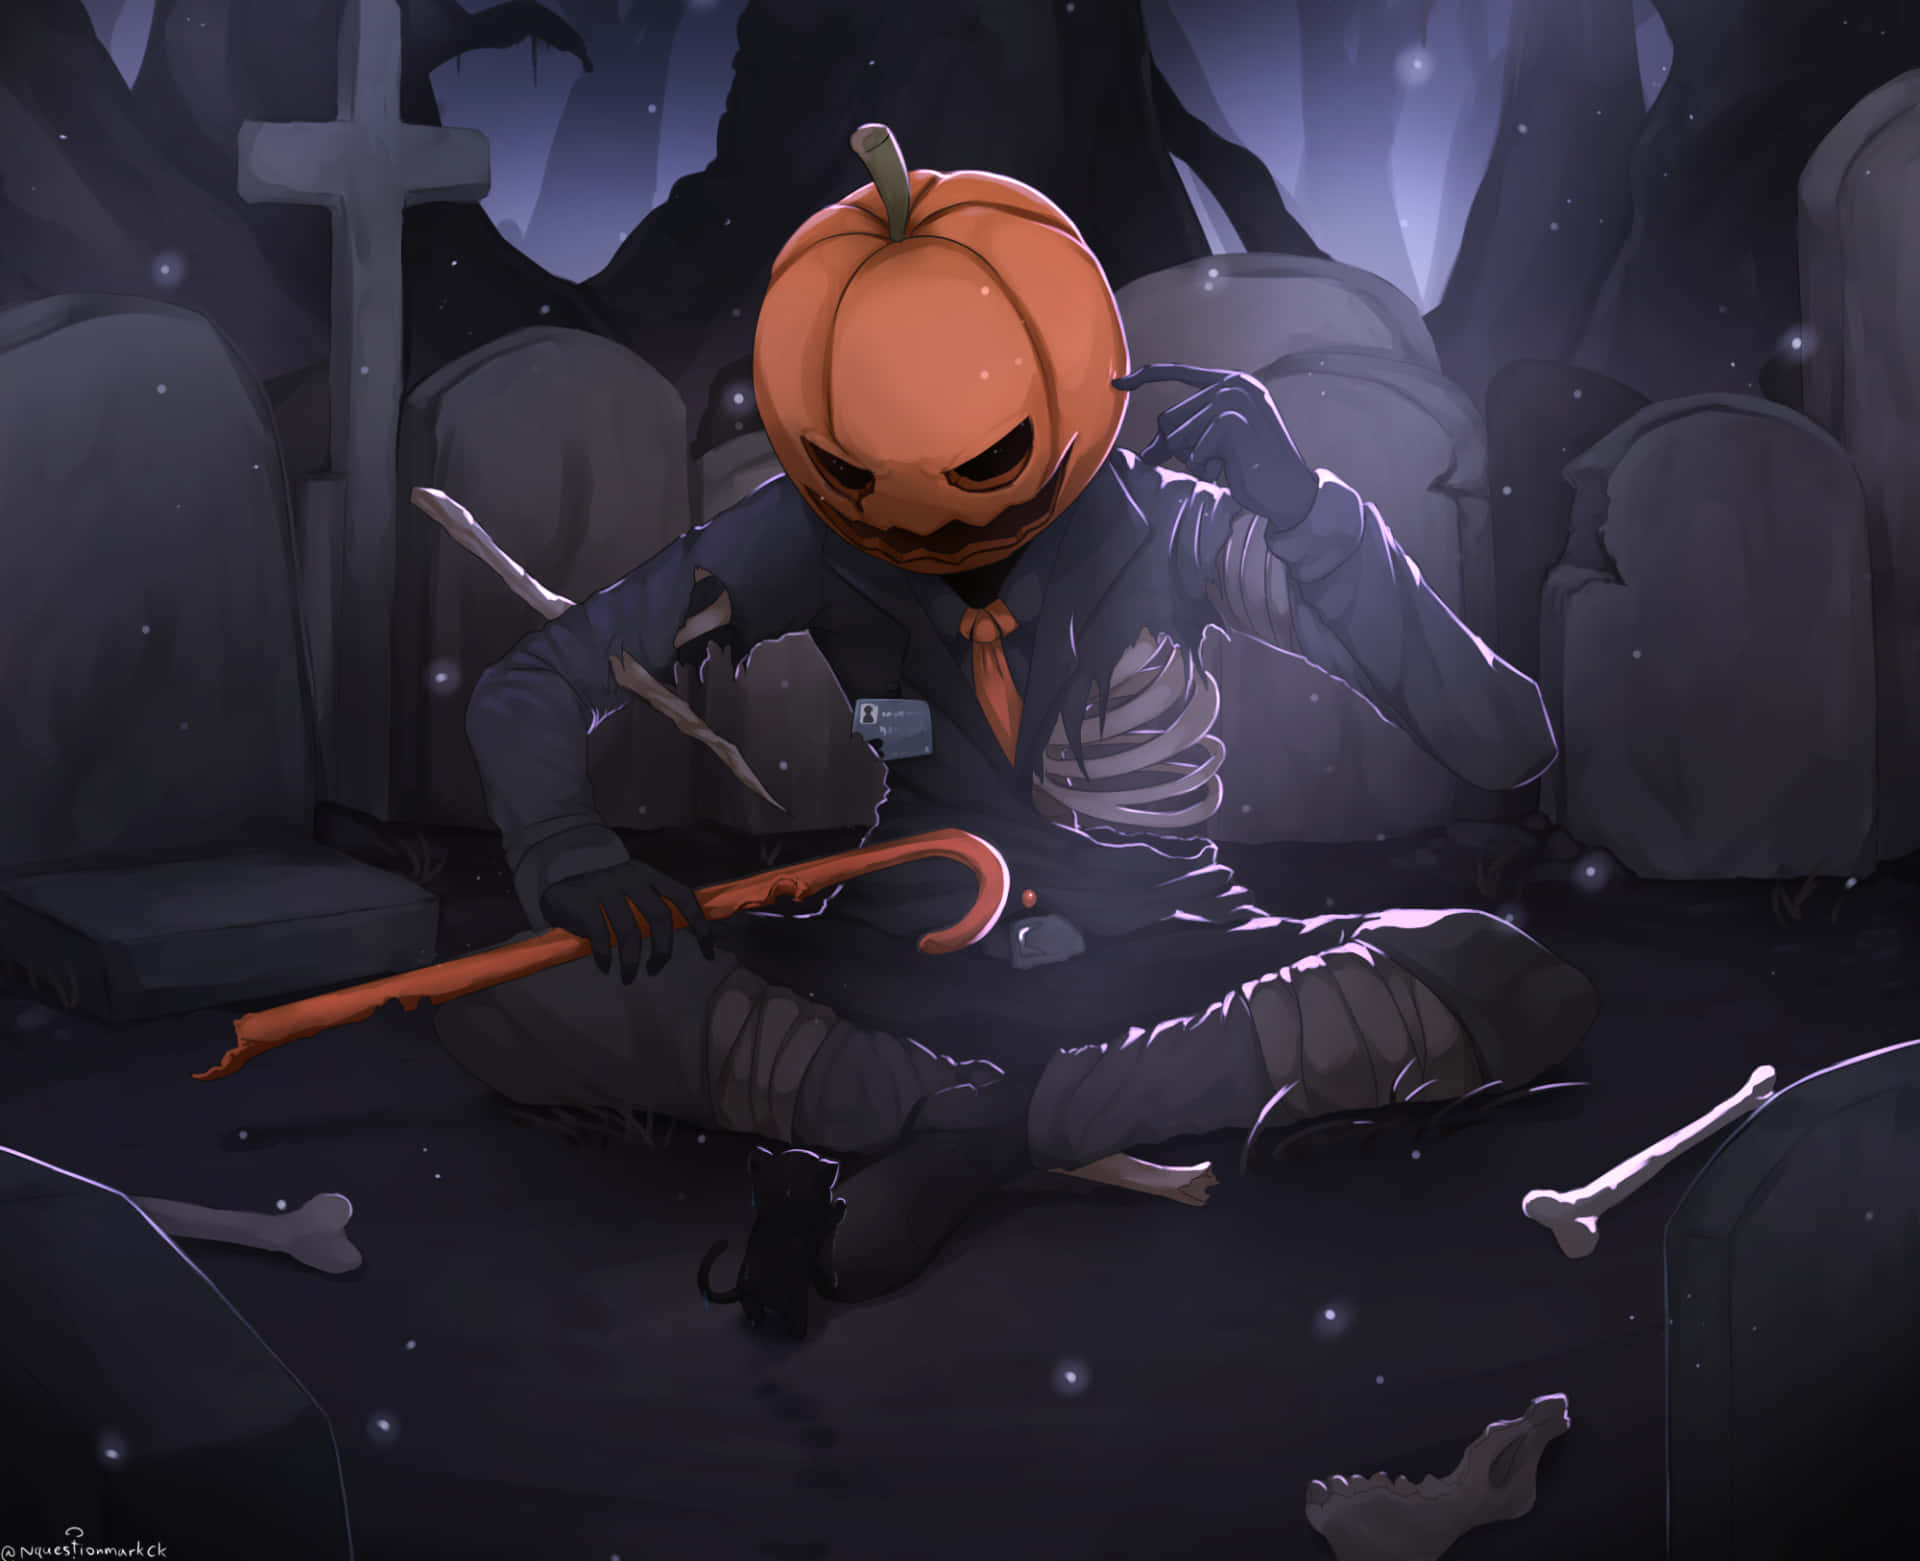 Get into the Halloween spirit with this spooky profile picture!